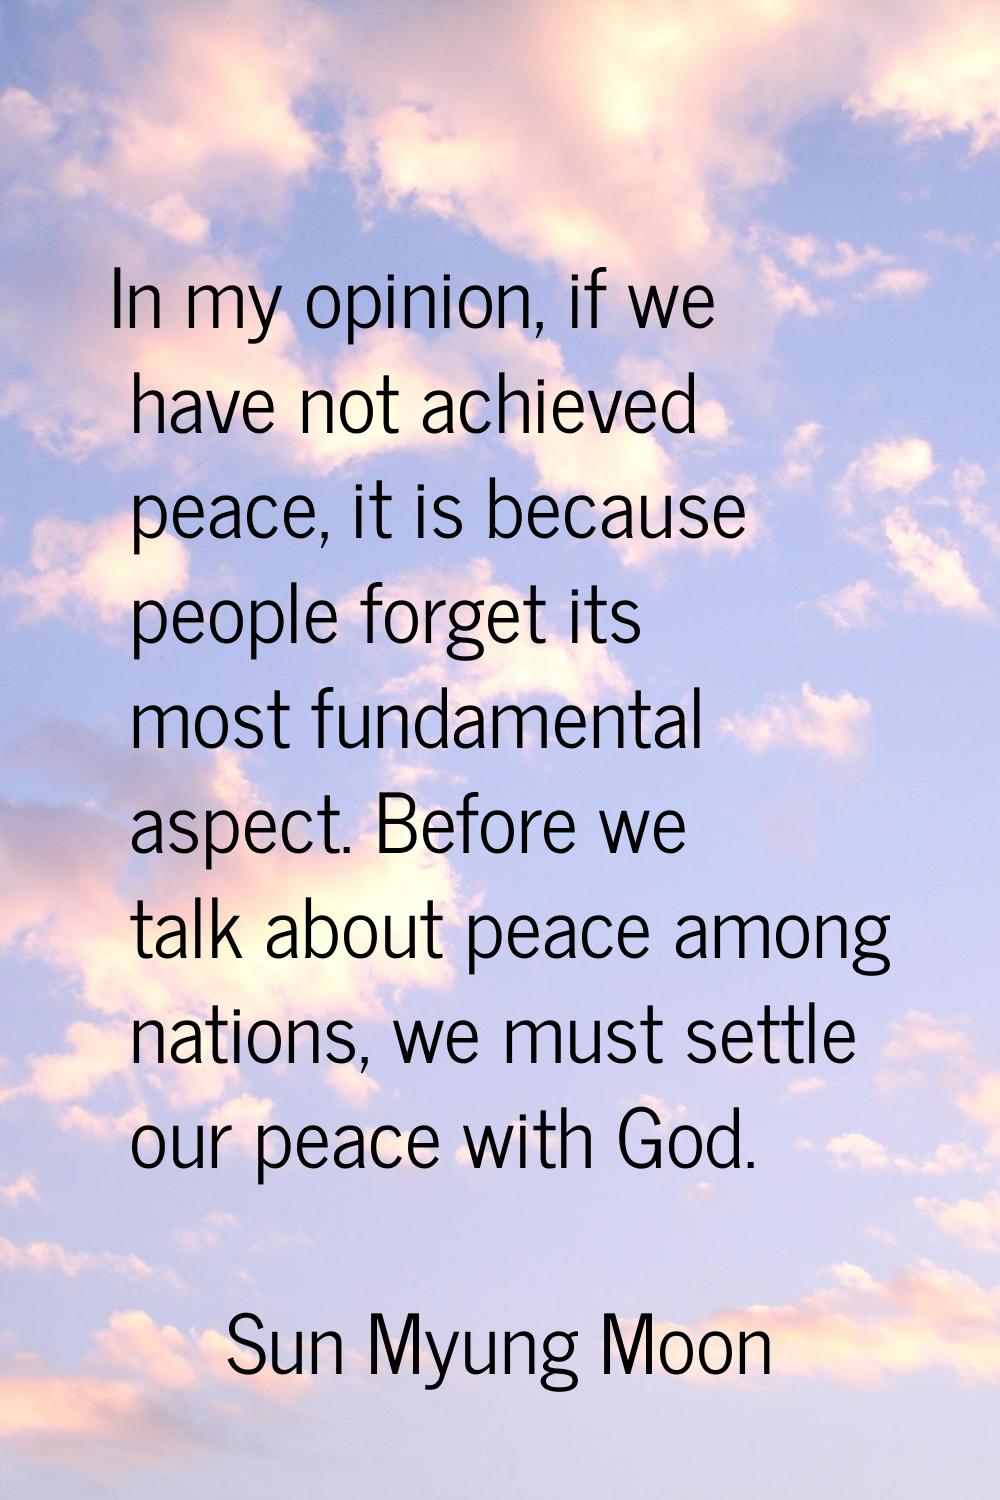 In my opinion, if we have not achieved peace, it is because people forget its most fundamental aspe